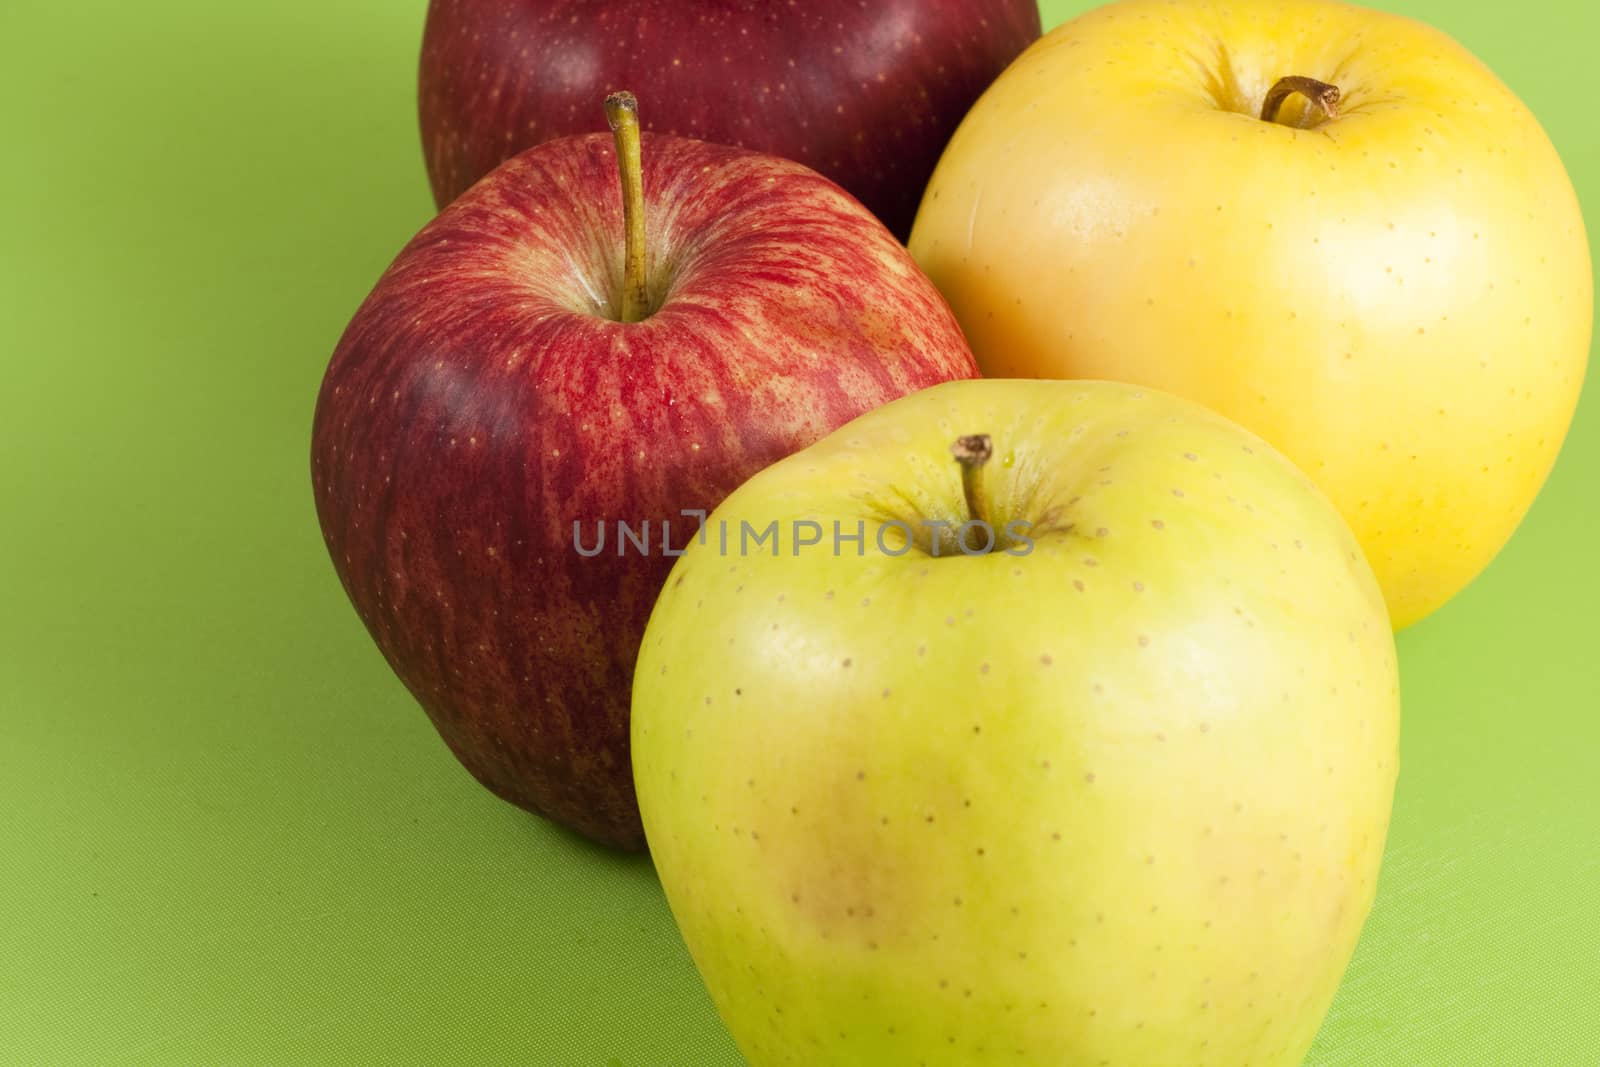 red and green apples on a green floor and a whole pear